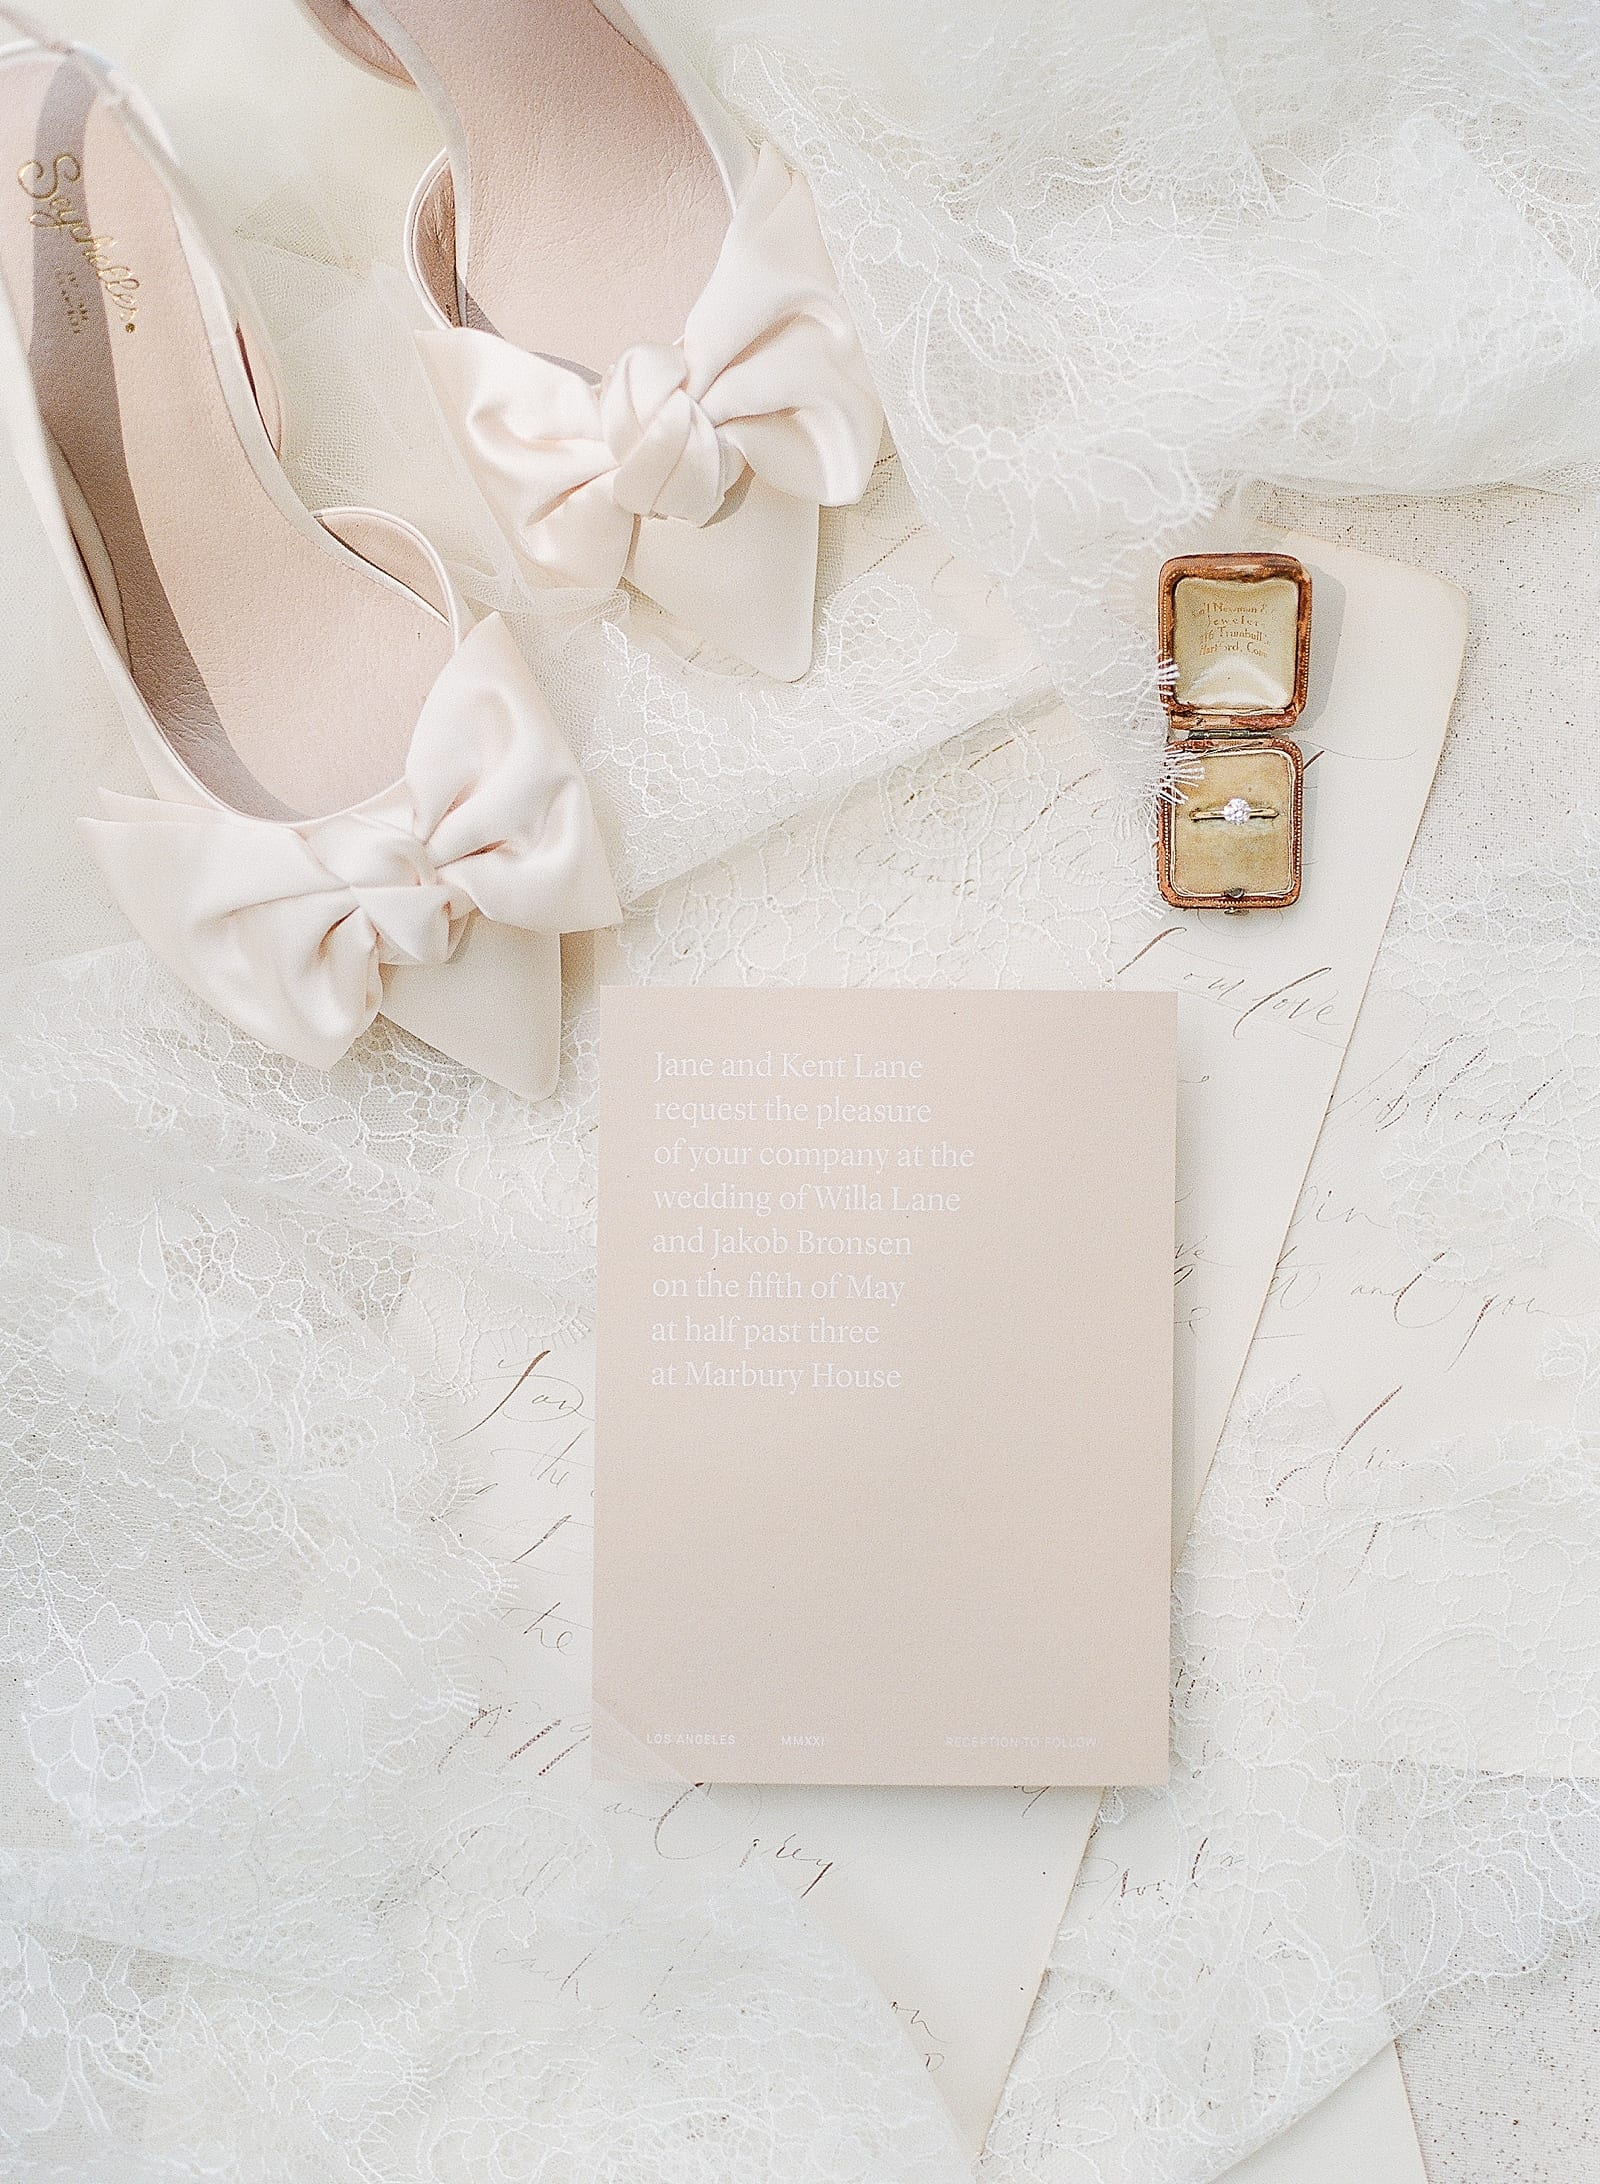 Invitation Suite Shoes and Ring Box Wedding Details Photo